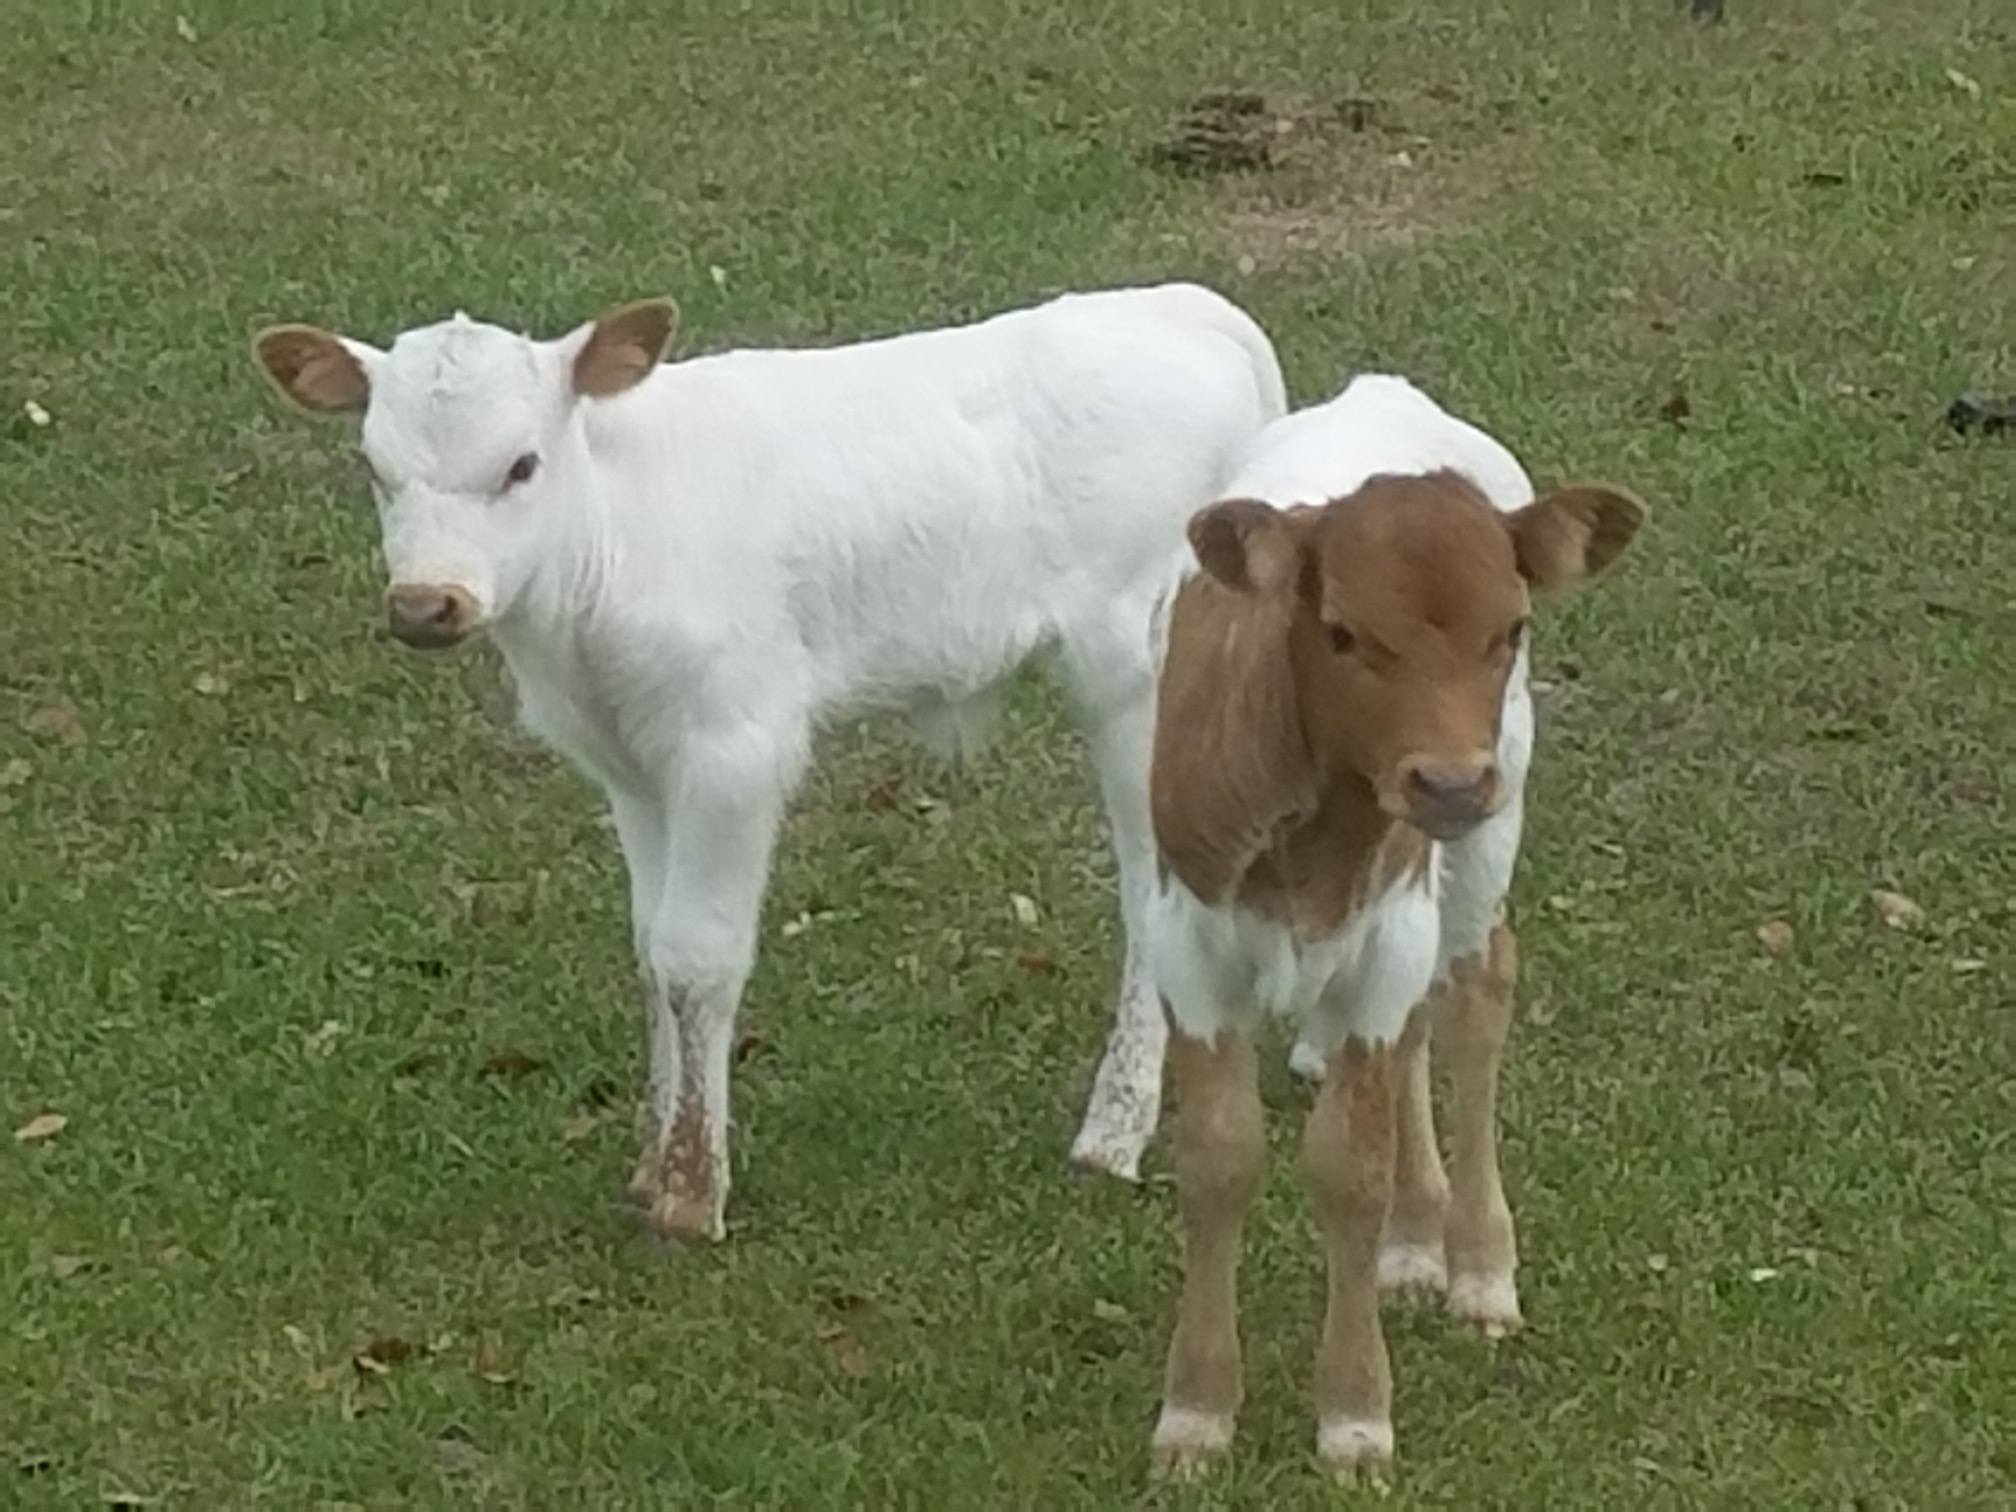 two calves standing next to each other